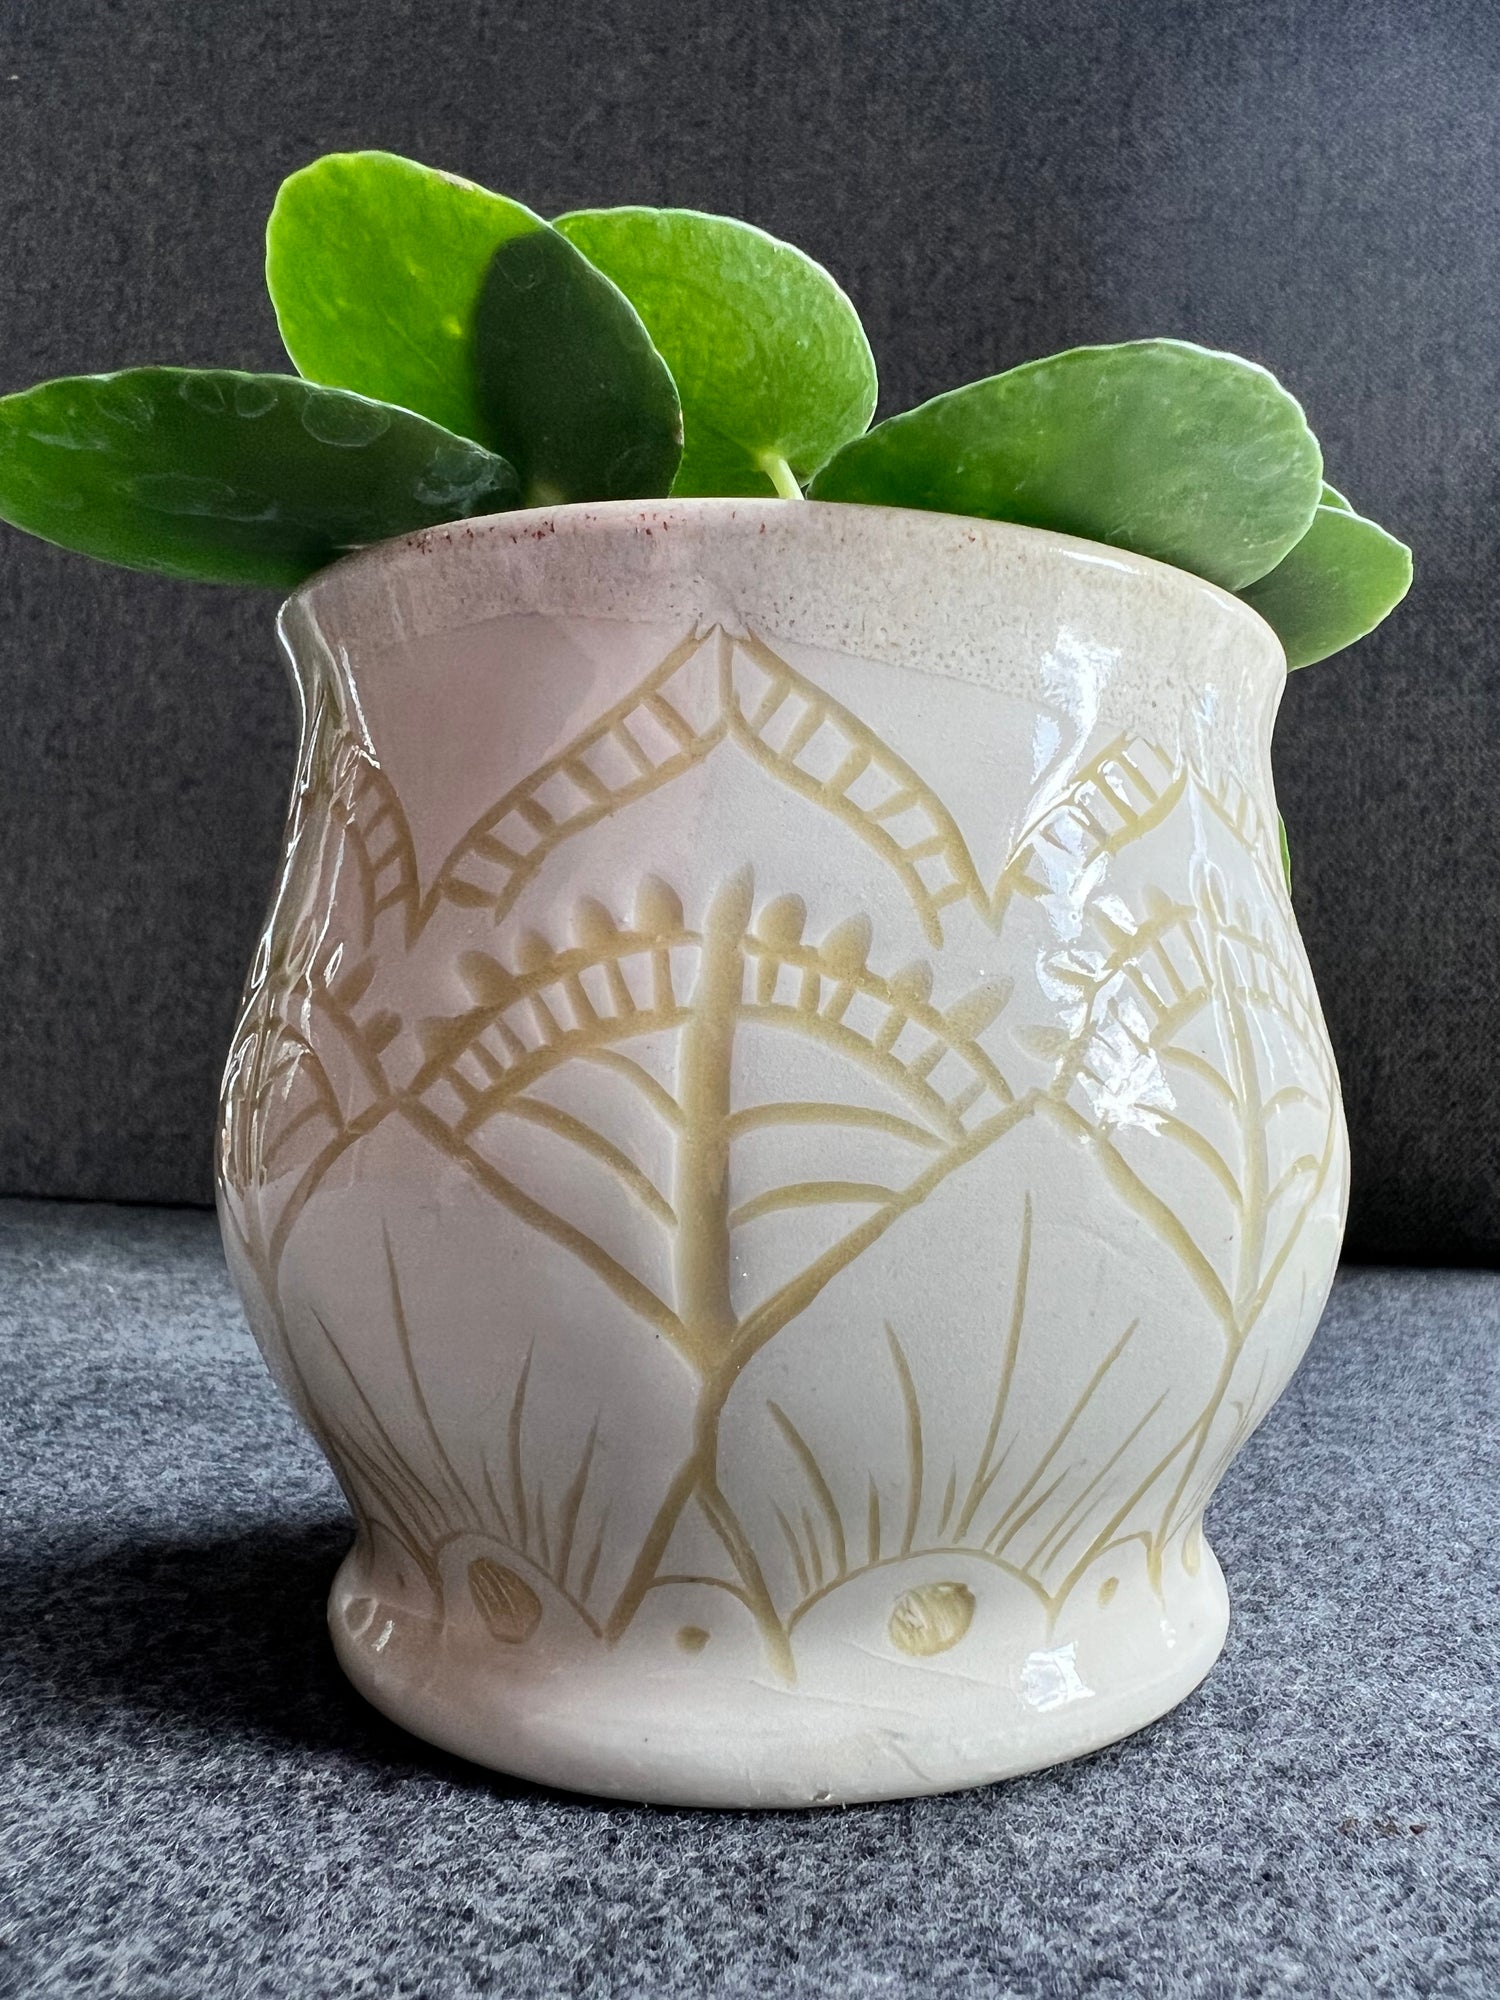 A white ceramic pot with abstract carvings is inlaid with a creamy yellow underglaze.